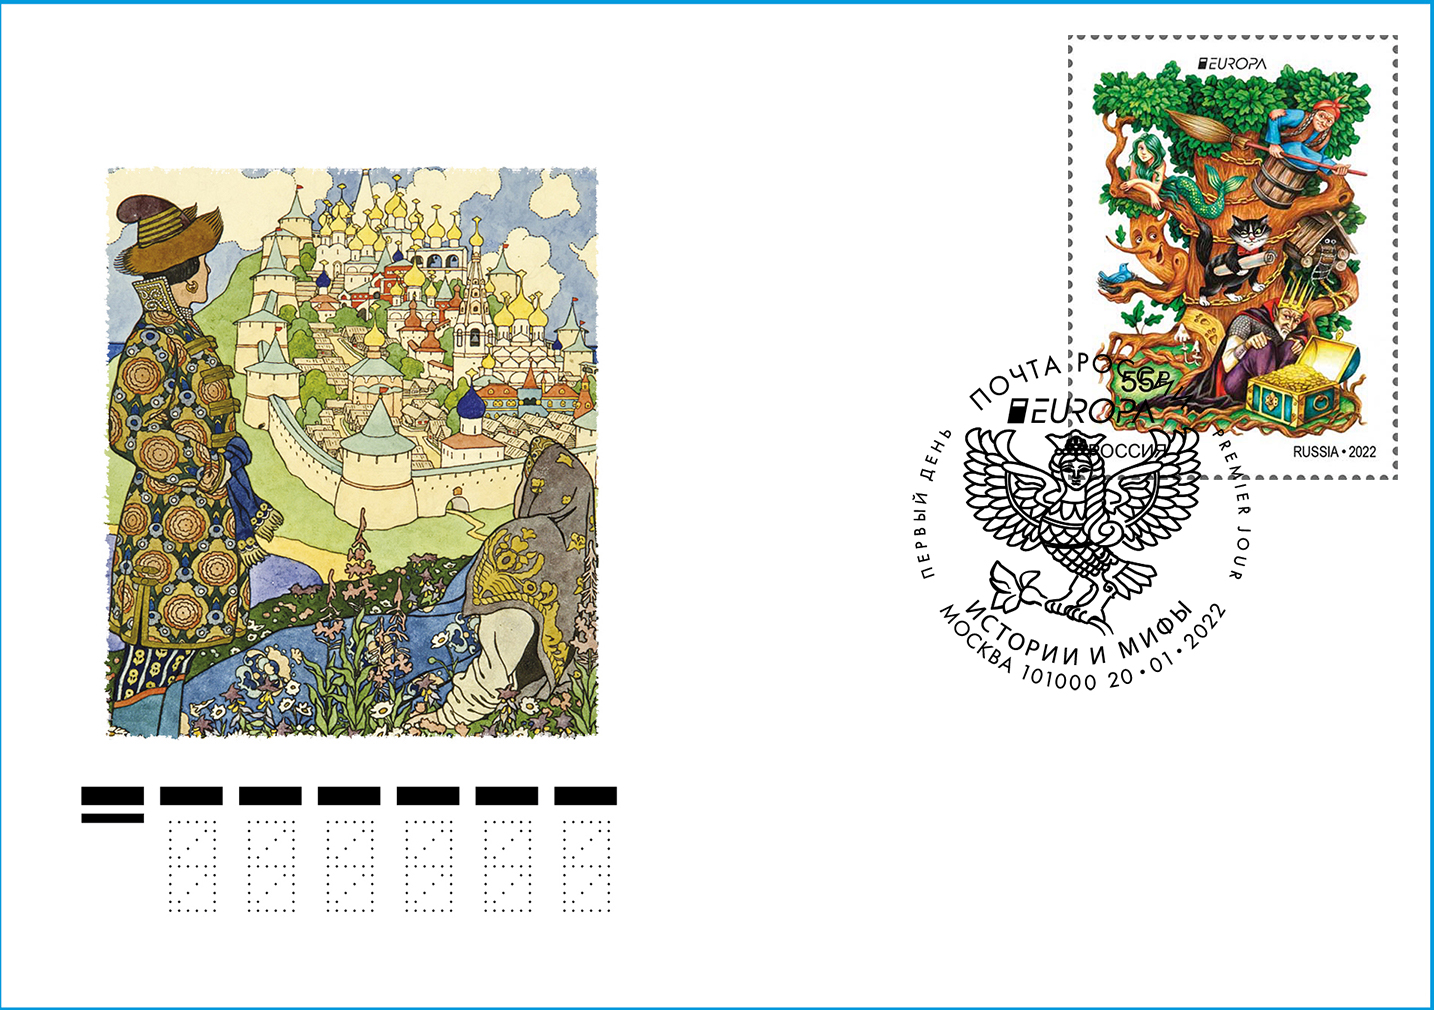 EUROPA Stamps Issue. Stories and myths